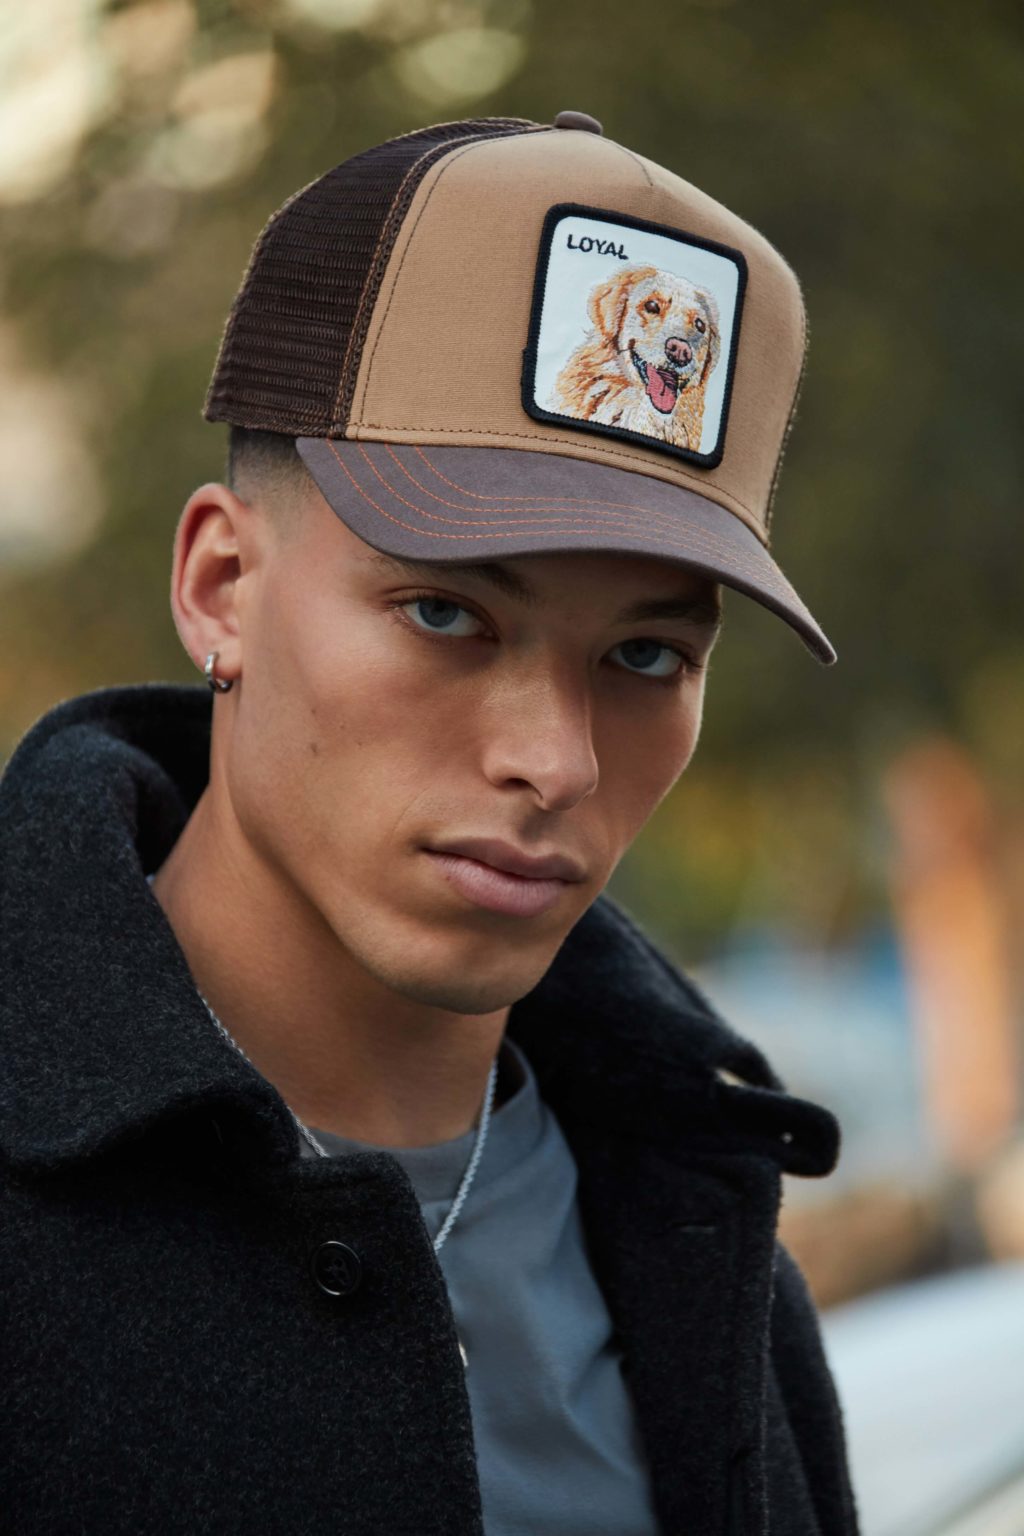 A male model with black sweater and a cap